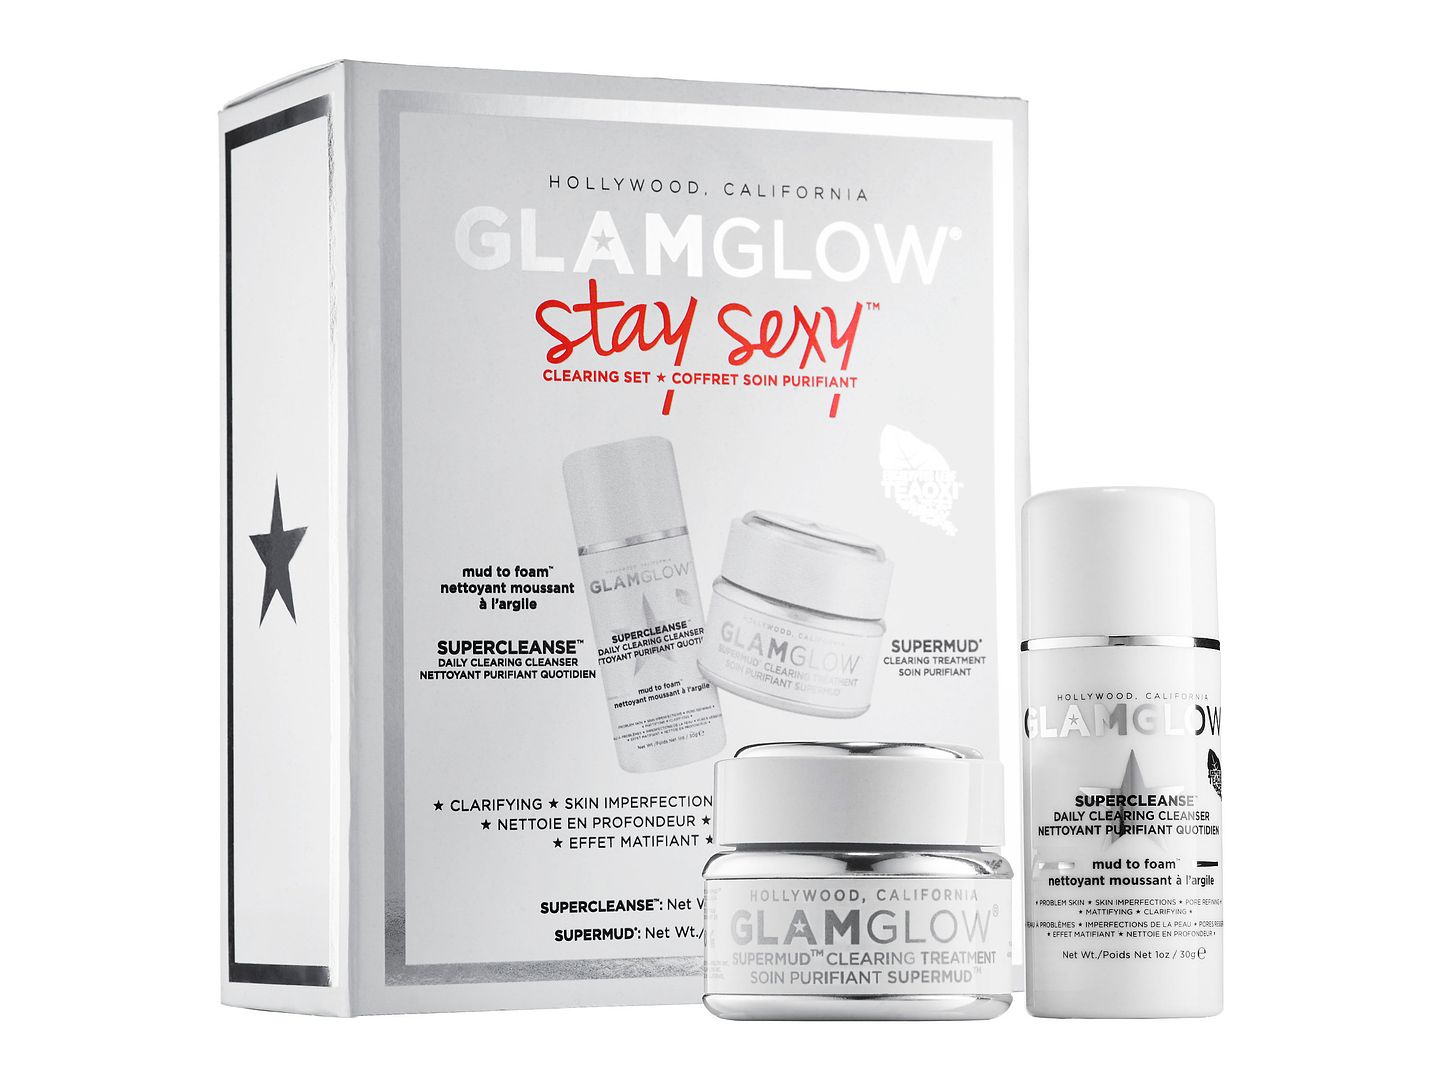  photo Sephora GLAMGLOW Stay Sexy Clearing Set